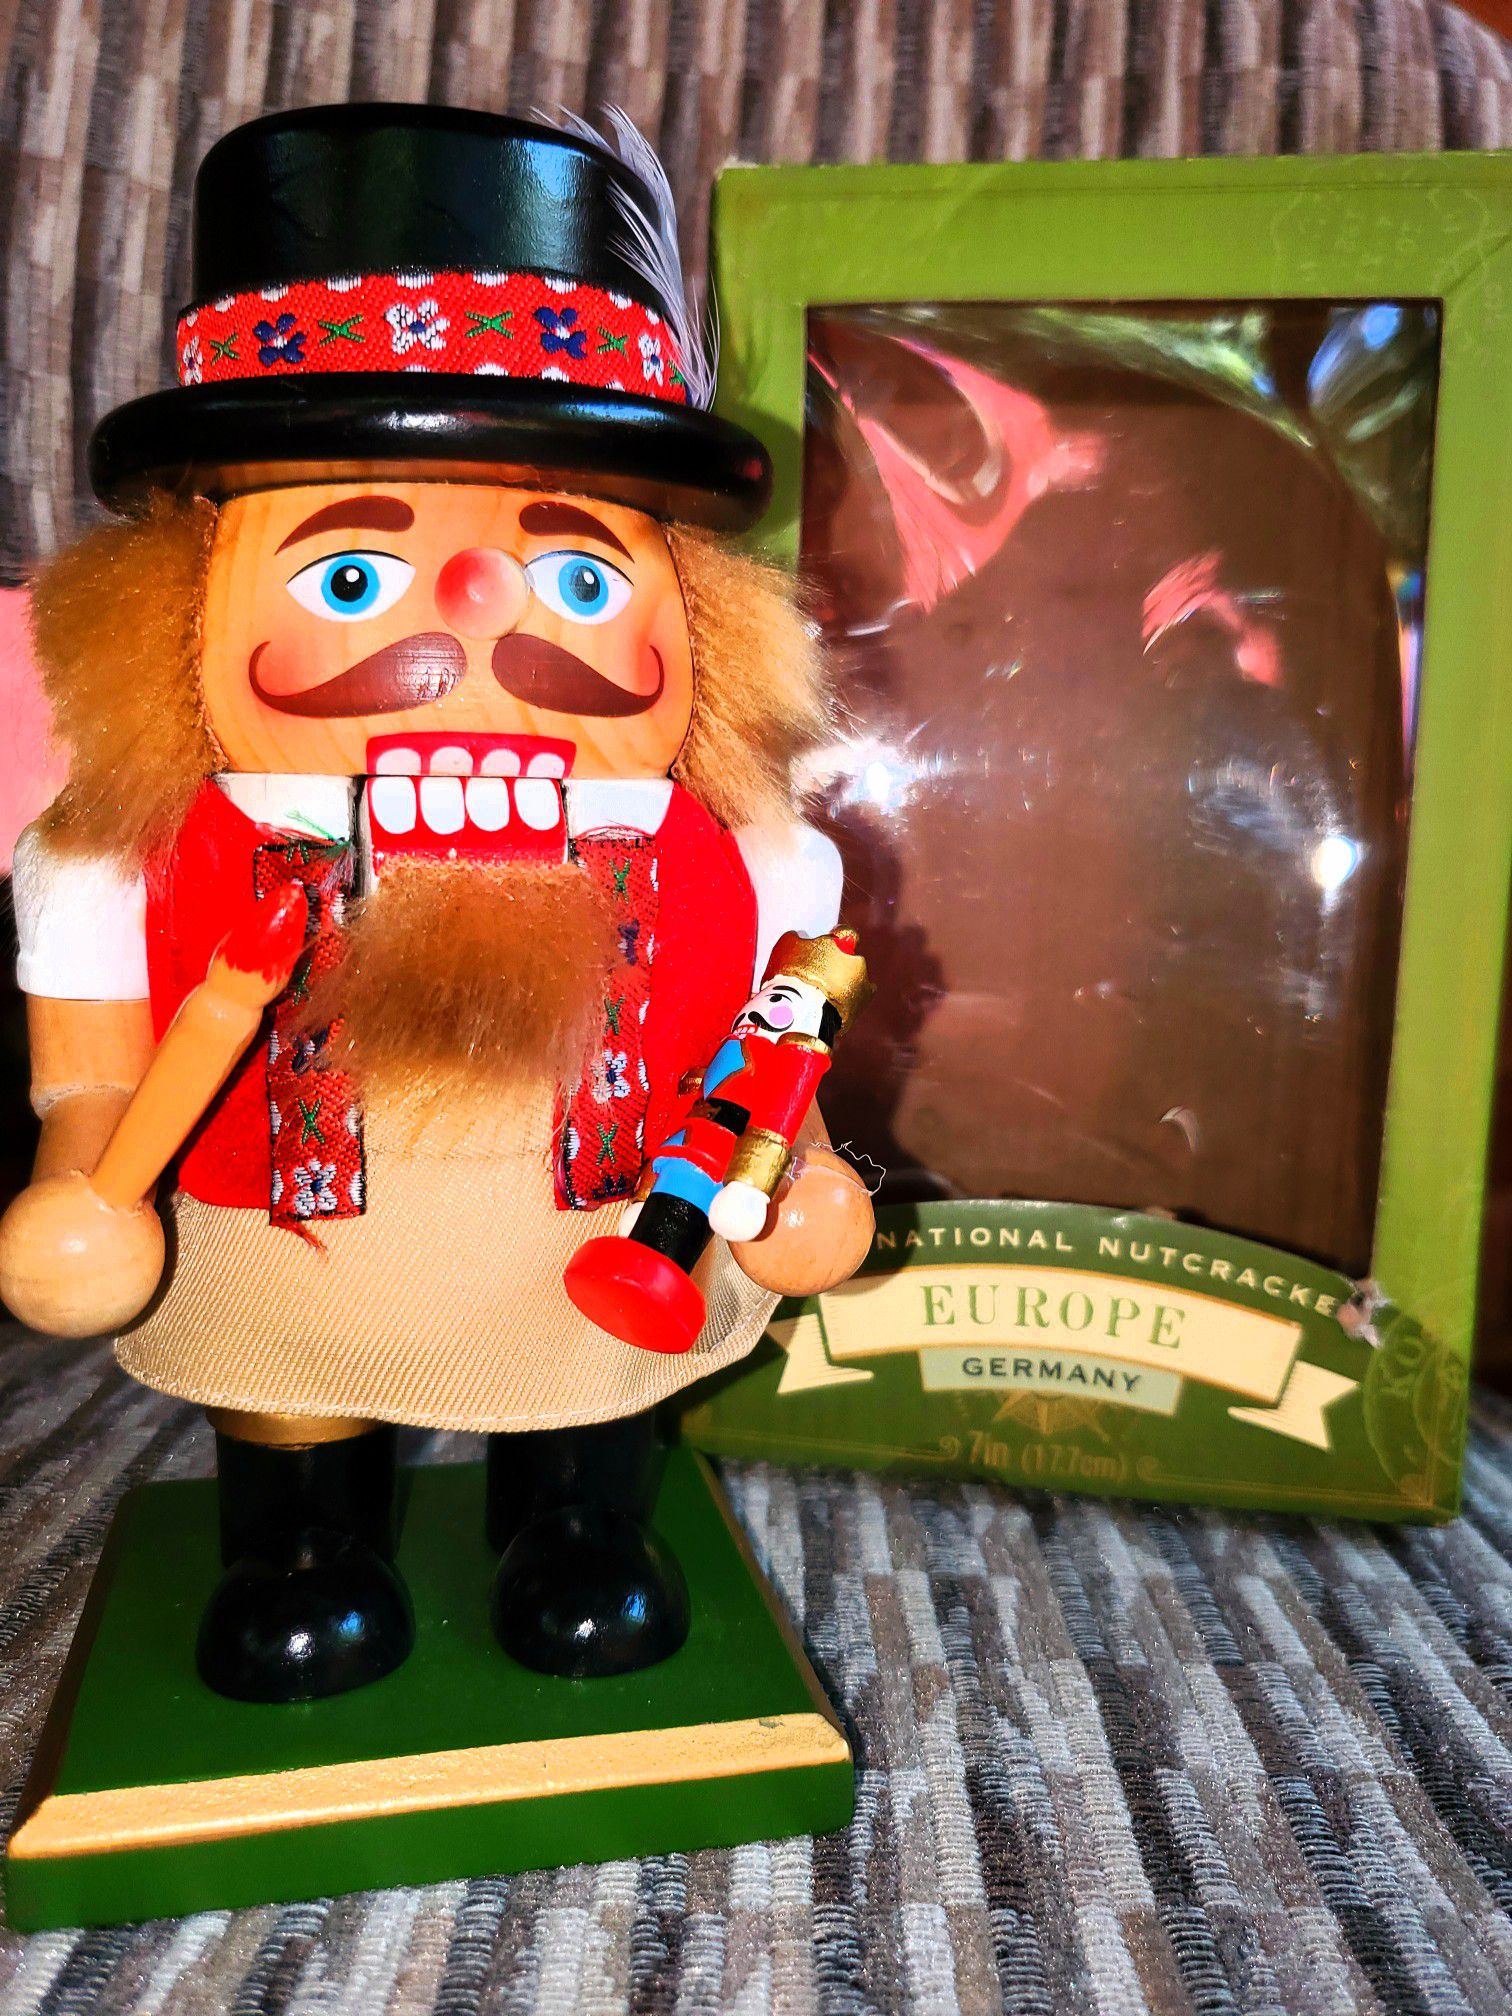 International European Collectible Handcrafted Nutcracker (Germany)